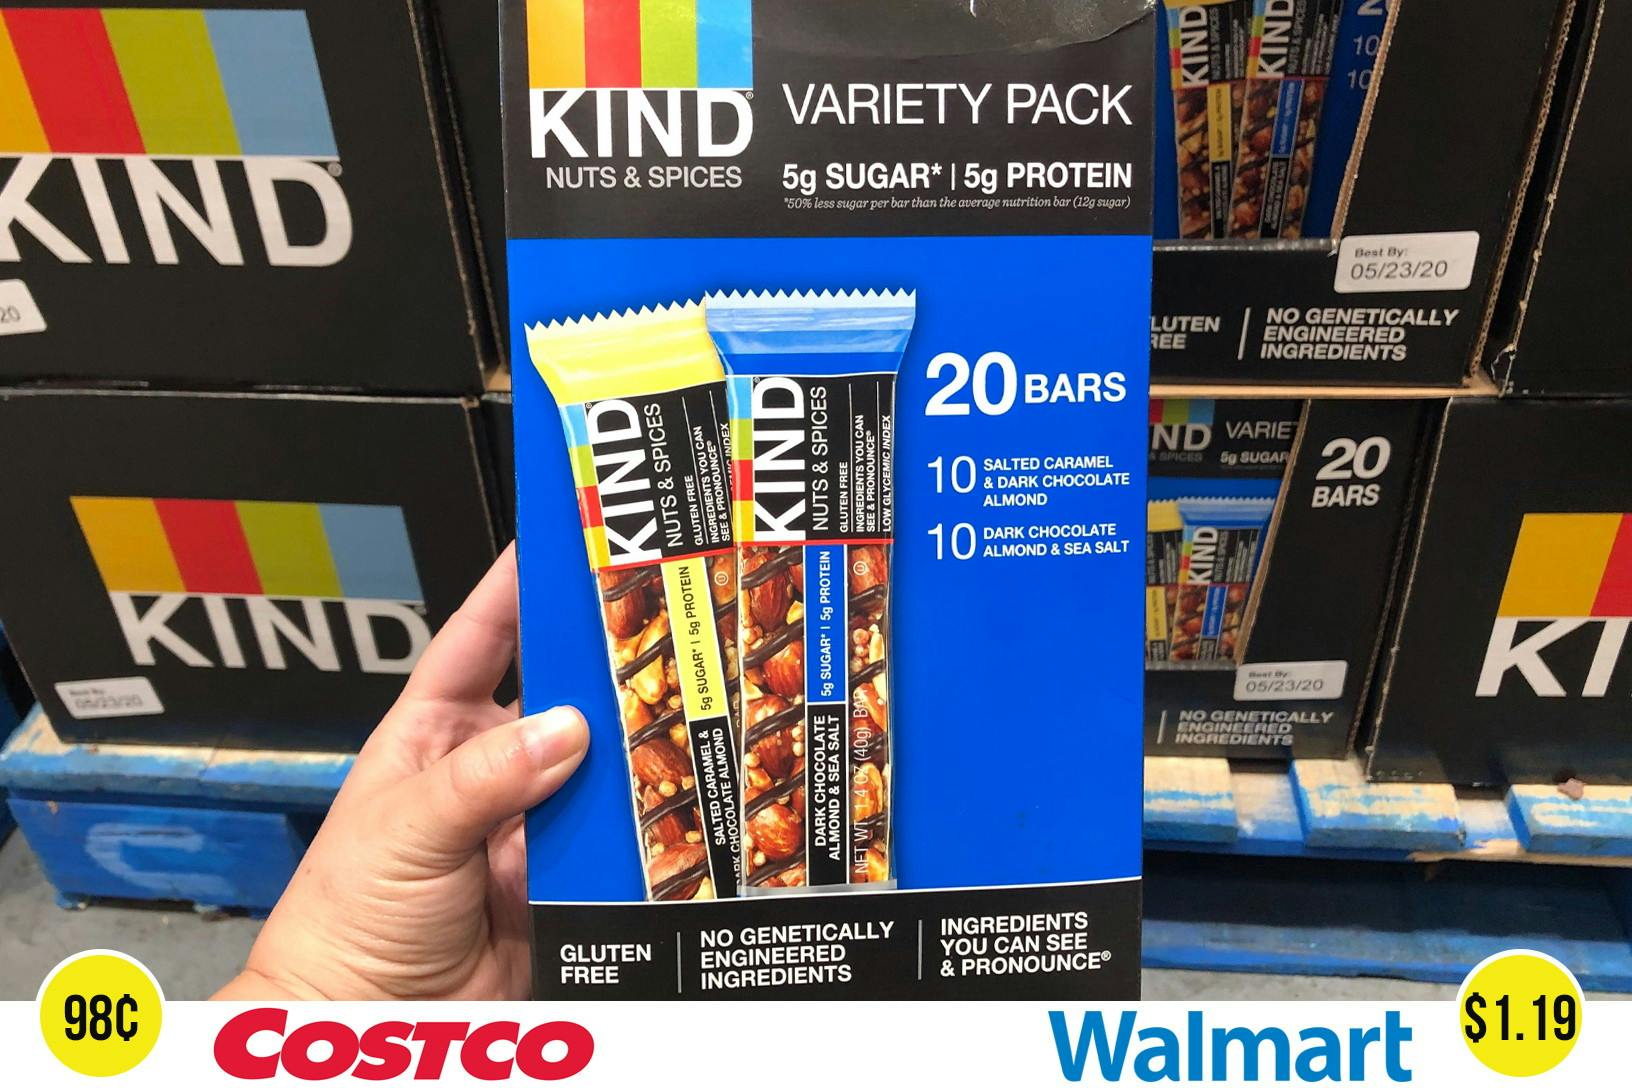 Best Deals At Costco 20 Items That Ll Justify Your Membership Fee The Krazy Coupon Lady